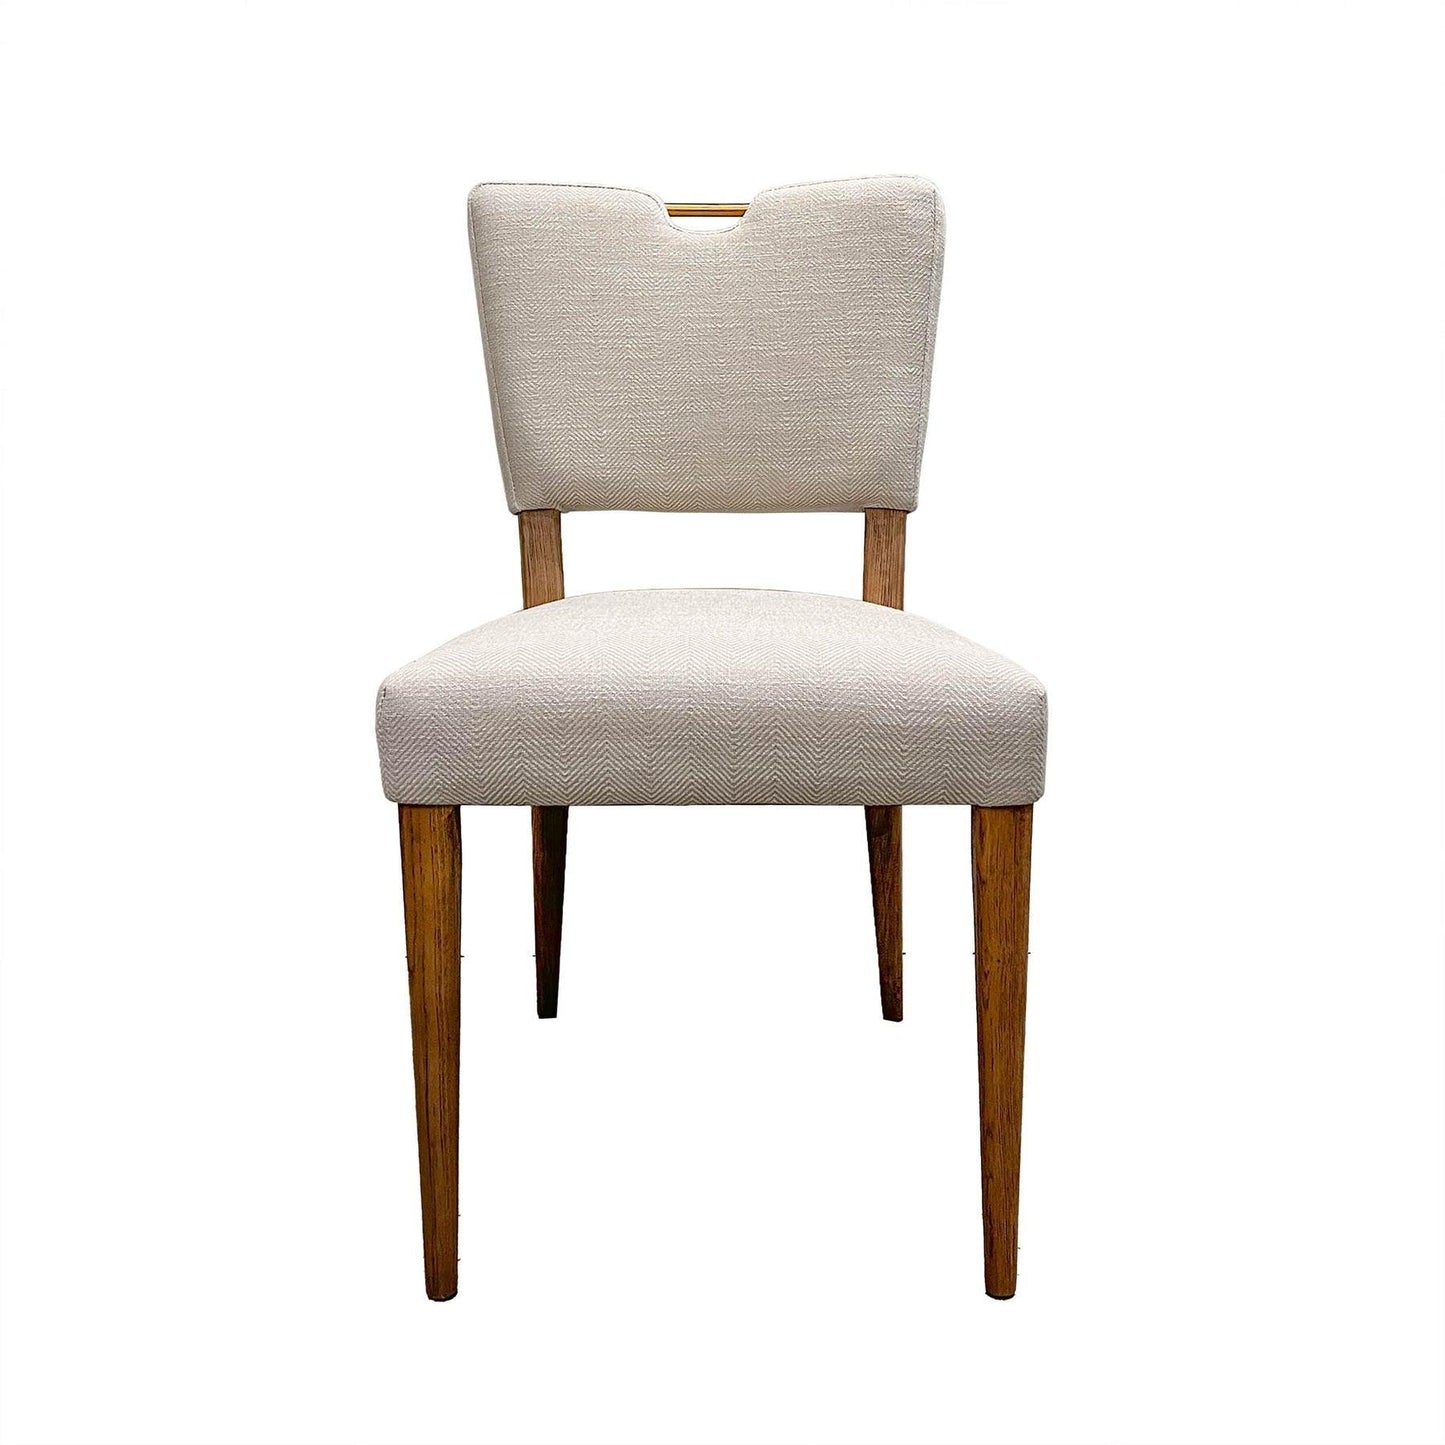 Luella Cream Linen Dining Chair 2PC Set Armless Floating Back - Sideboards and Things Accents_Black, Back Type_Floating Back, Back Type_With Back, Brand_LH Imports, Color_White, Legs Material_Wood, Number of Pieces_2PC Set, Product Type_Dining Height, Shape_Armless, Upholstery Type_Fabric Blend